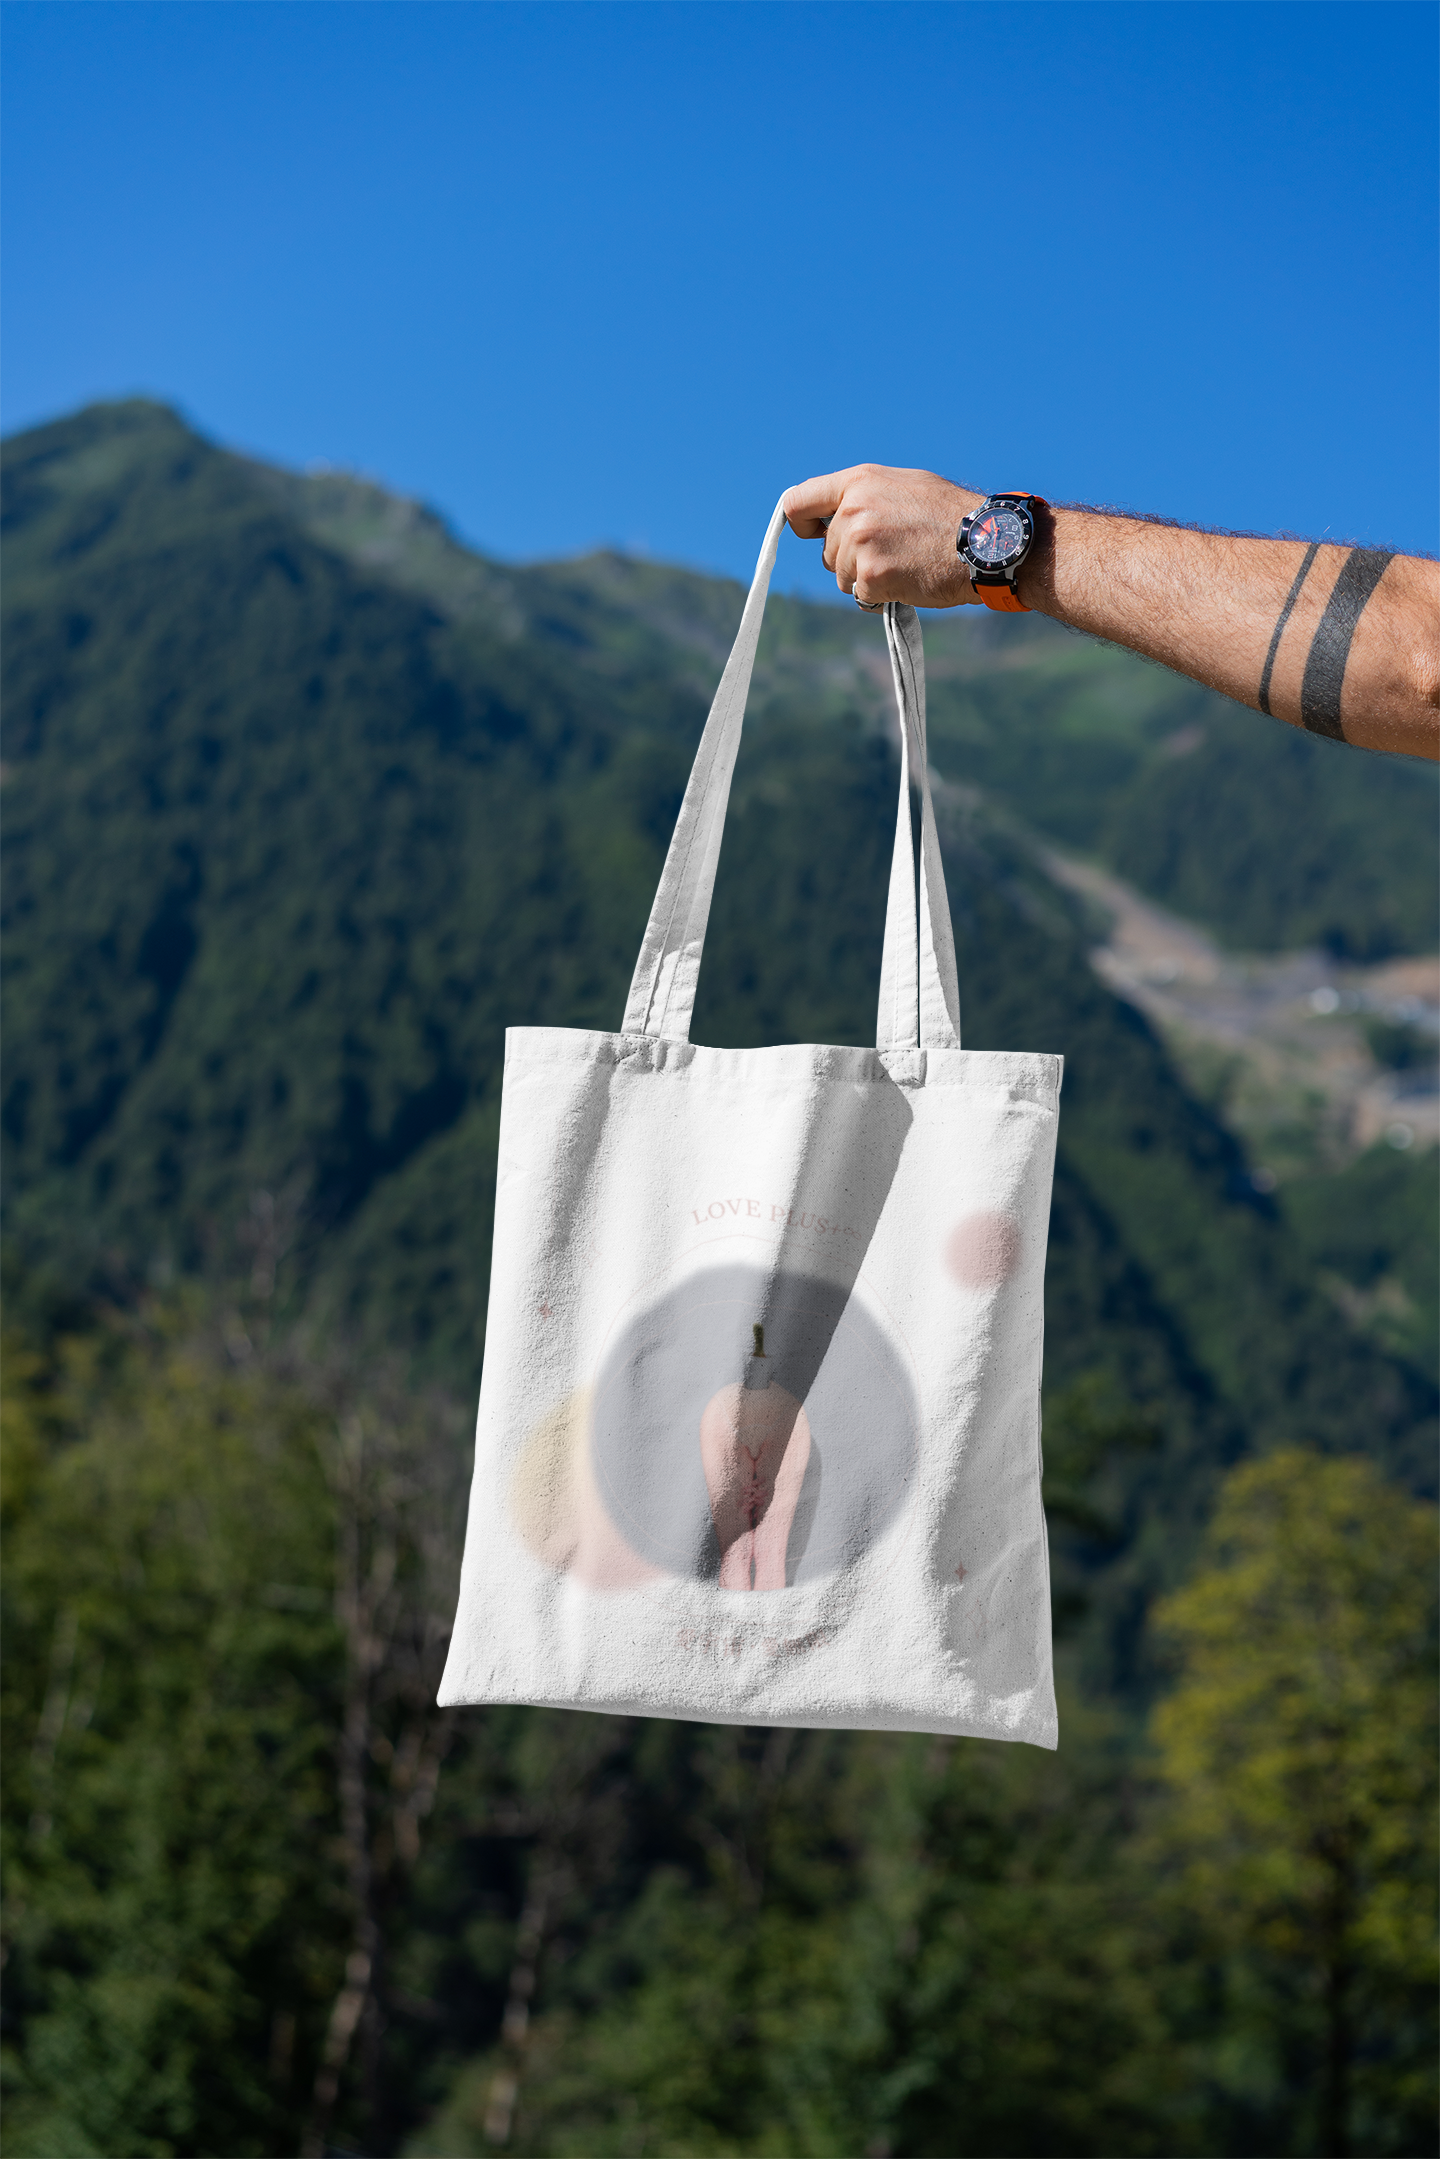 mockup-featuring-a-man-s-hand-holding-a-tote-bag-against-a-natural-scenery-3131-el1